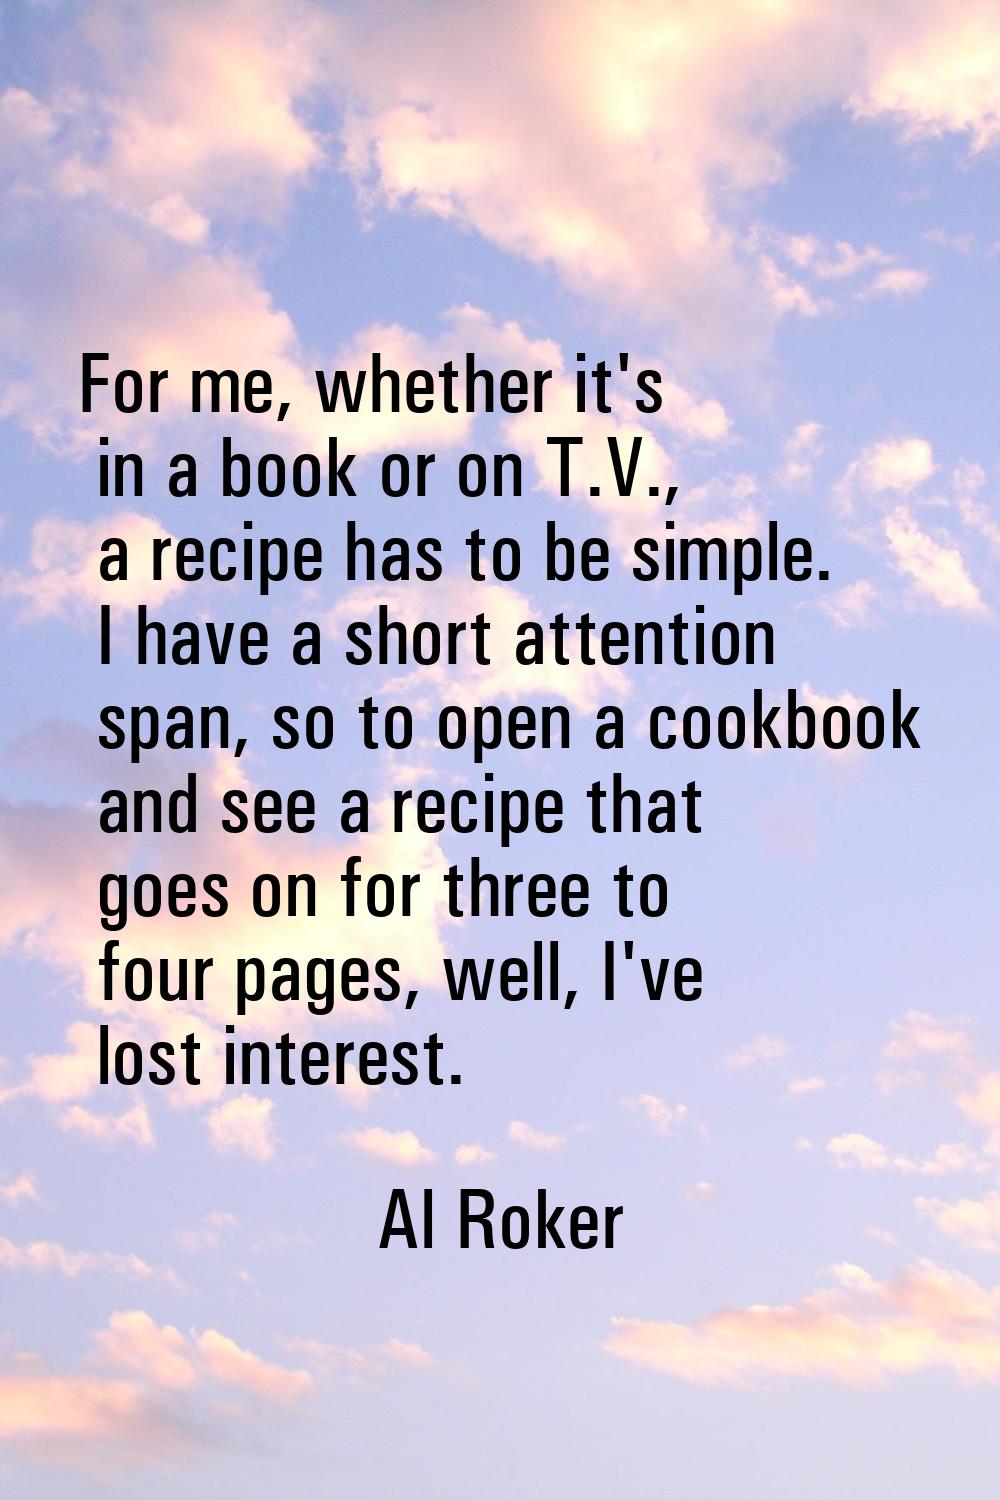 For me, whether it's in a book or on T.V., a recipe has to be simple. I have a short attention span